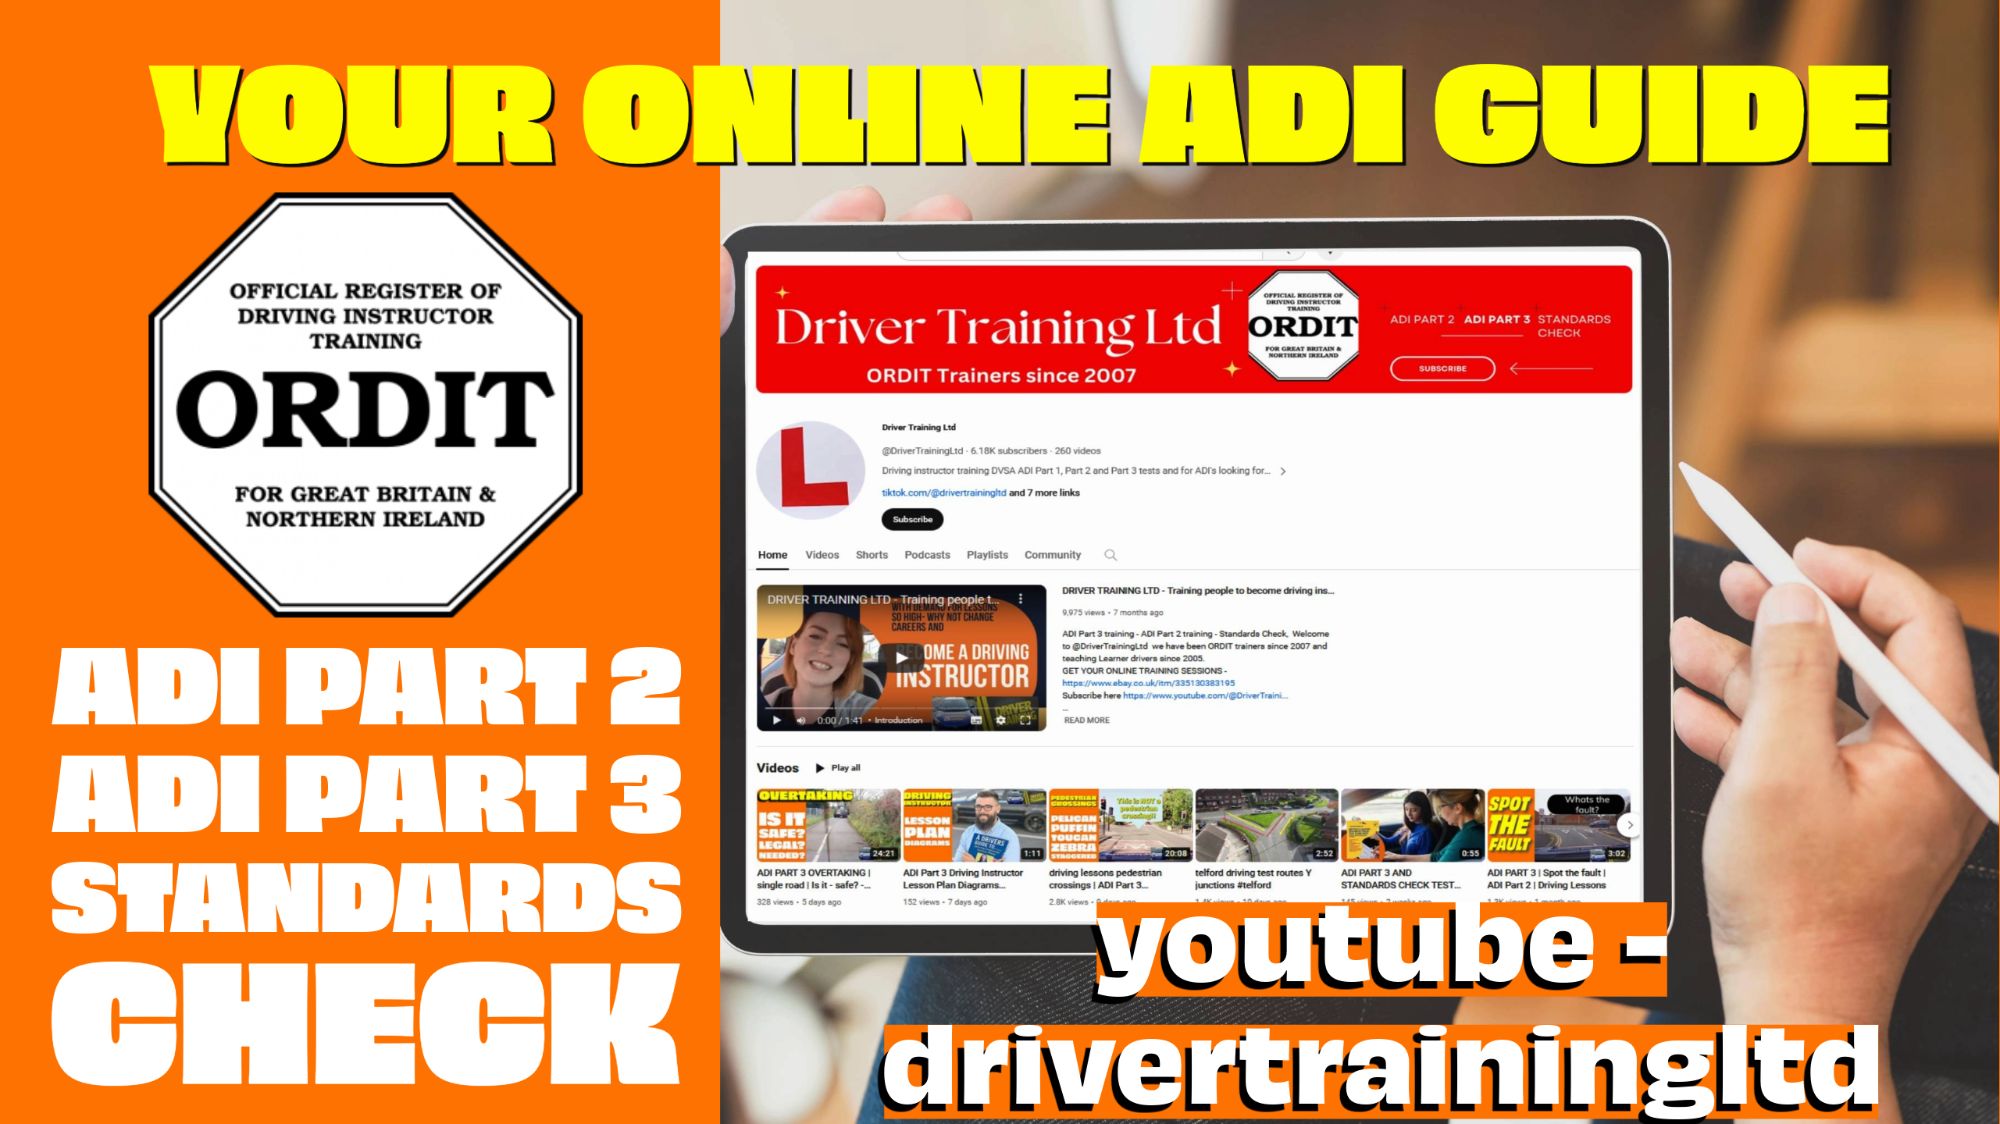 adi part 3, adi part 2, adi standards check training for becoming a driving instructor in Telford shropshire uk